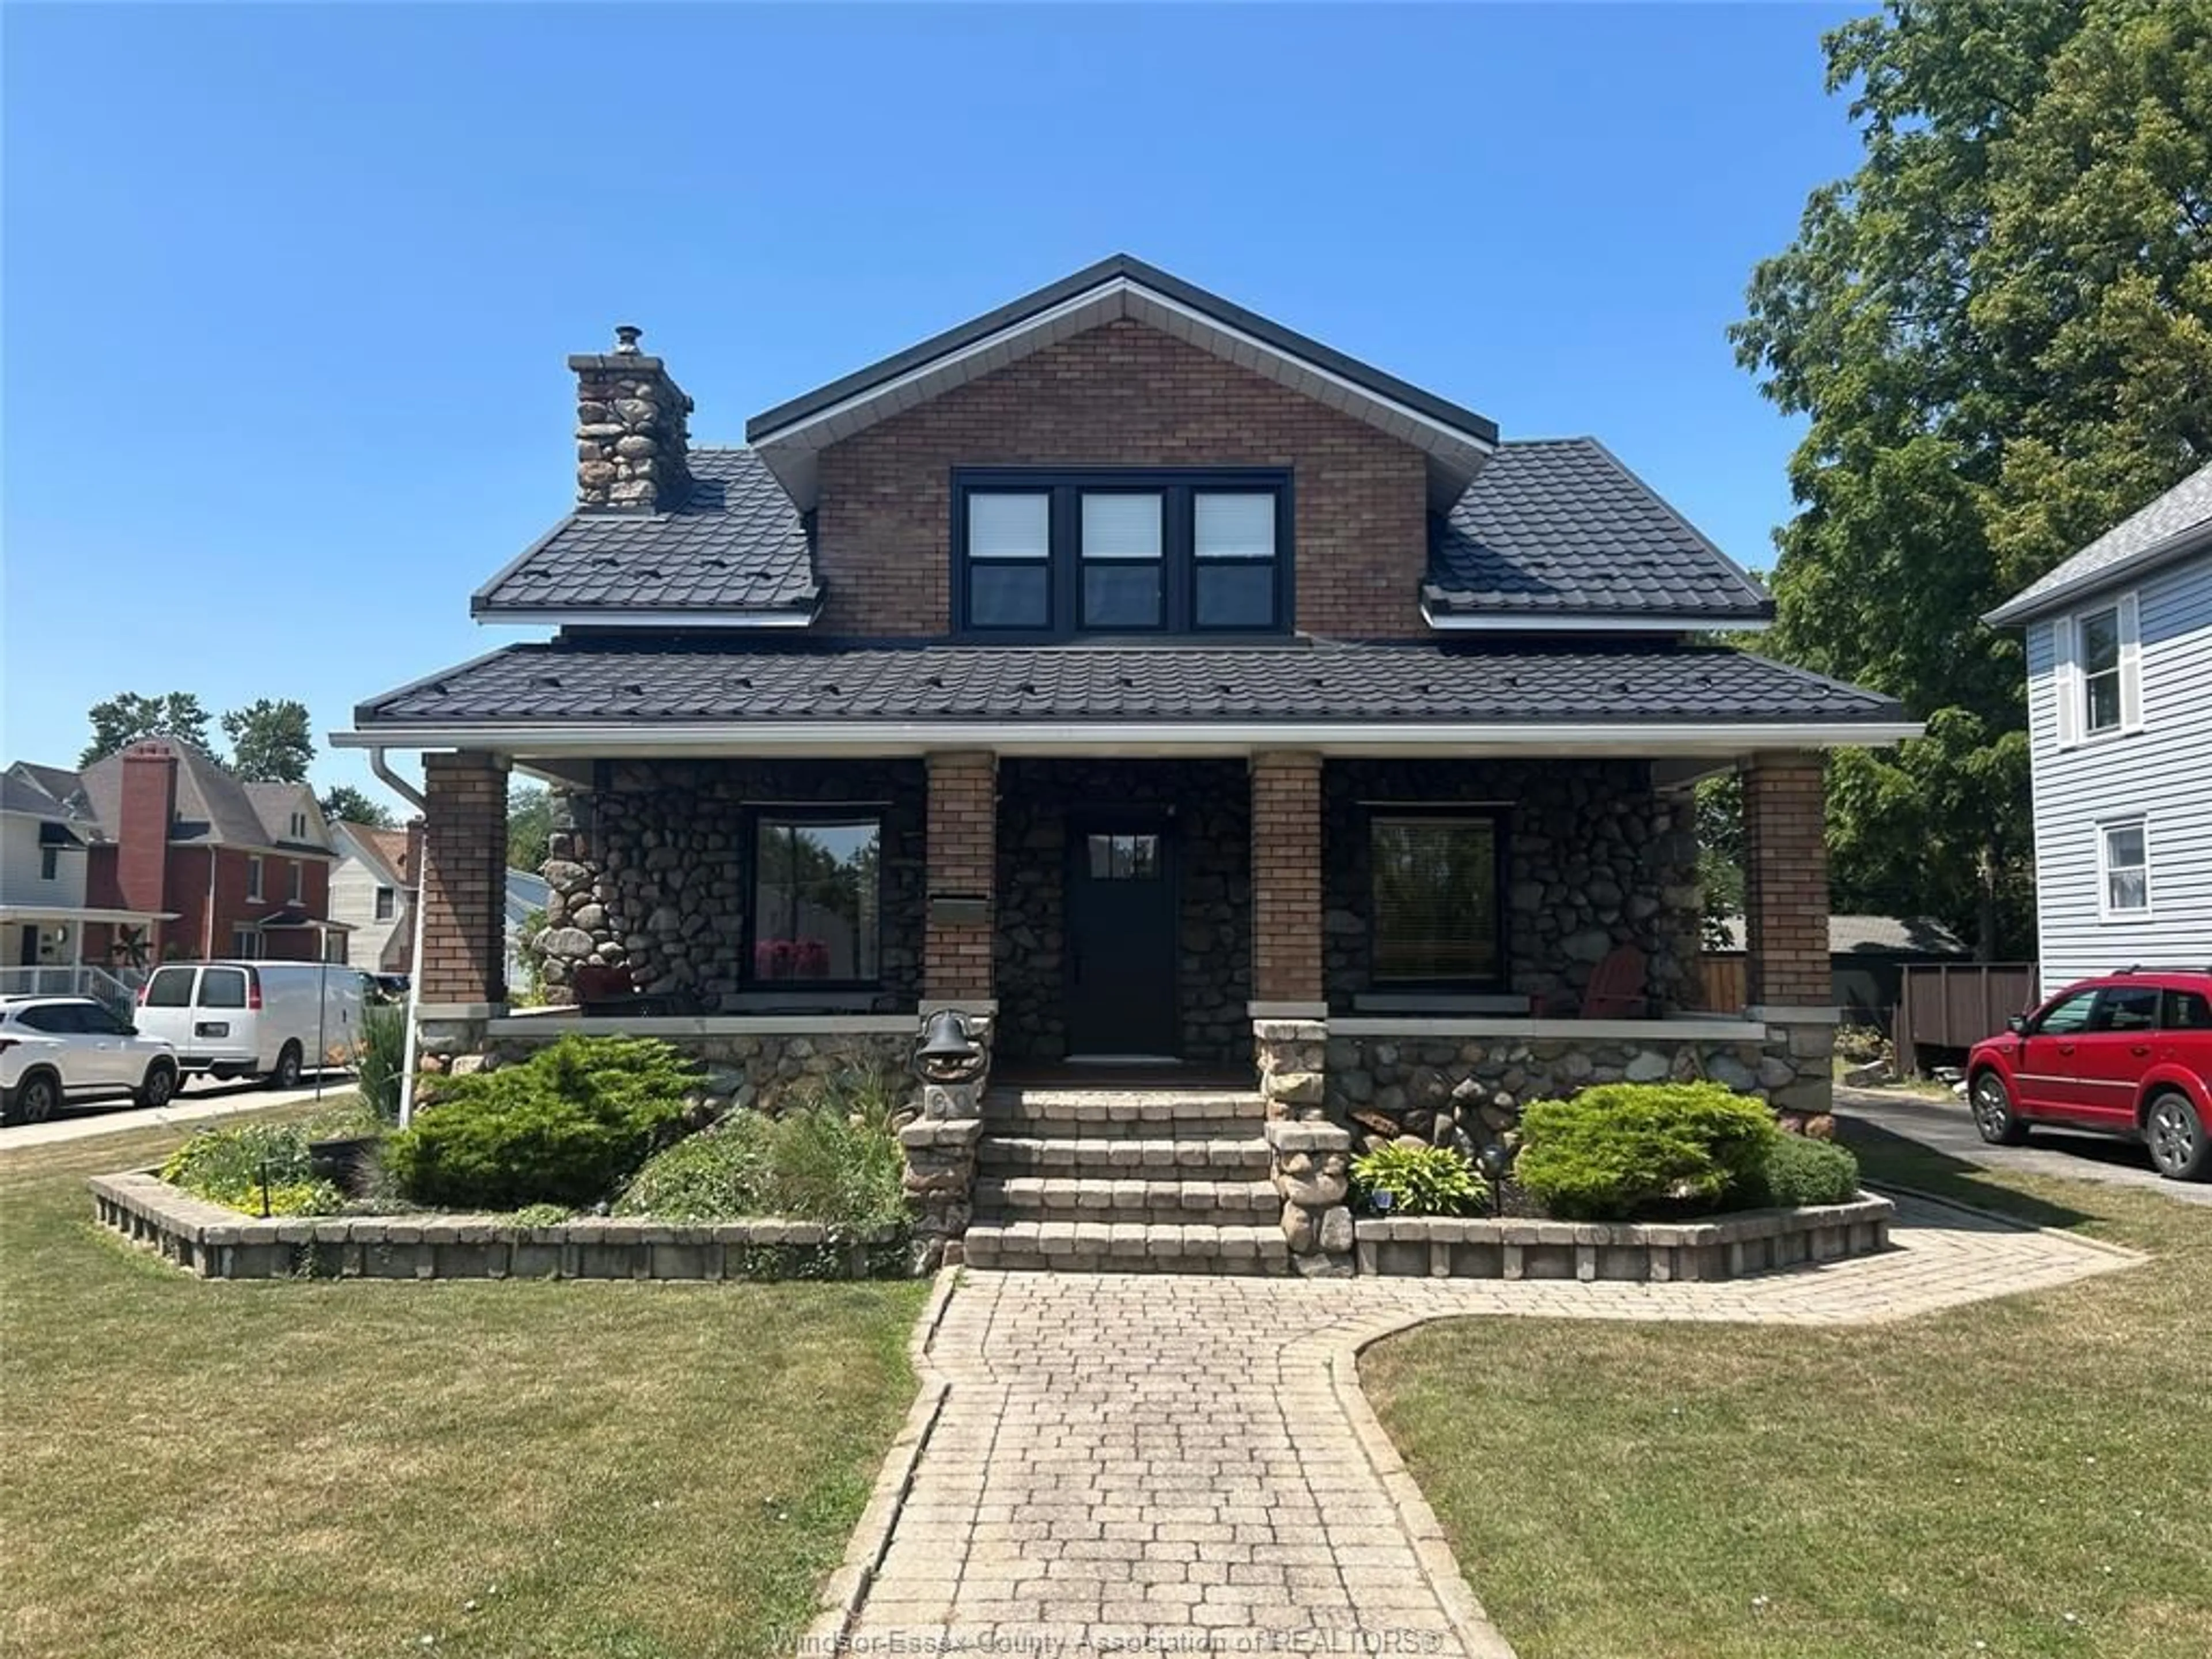 Home with brick exterior material for 60 SANDWICH St, Amherstburg Ontario N9V 1Z4